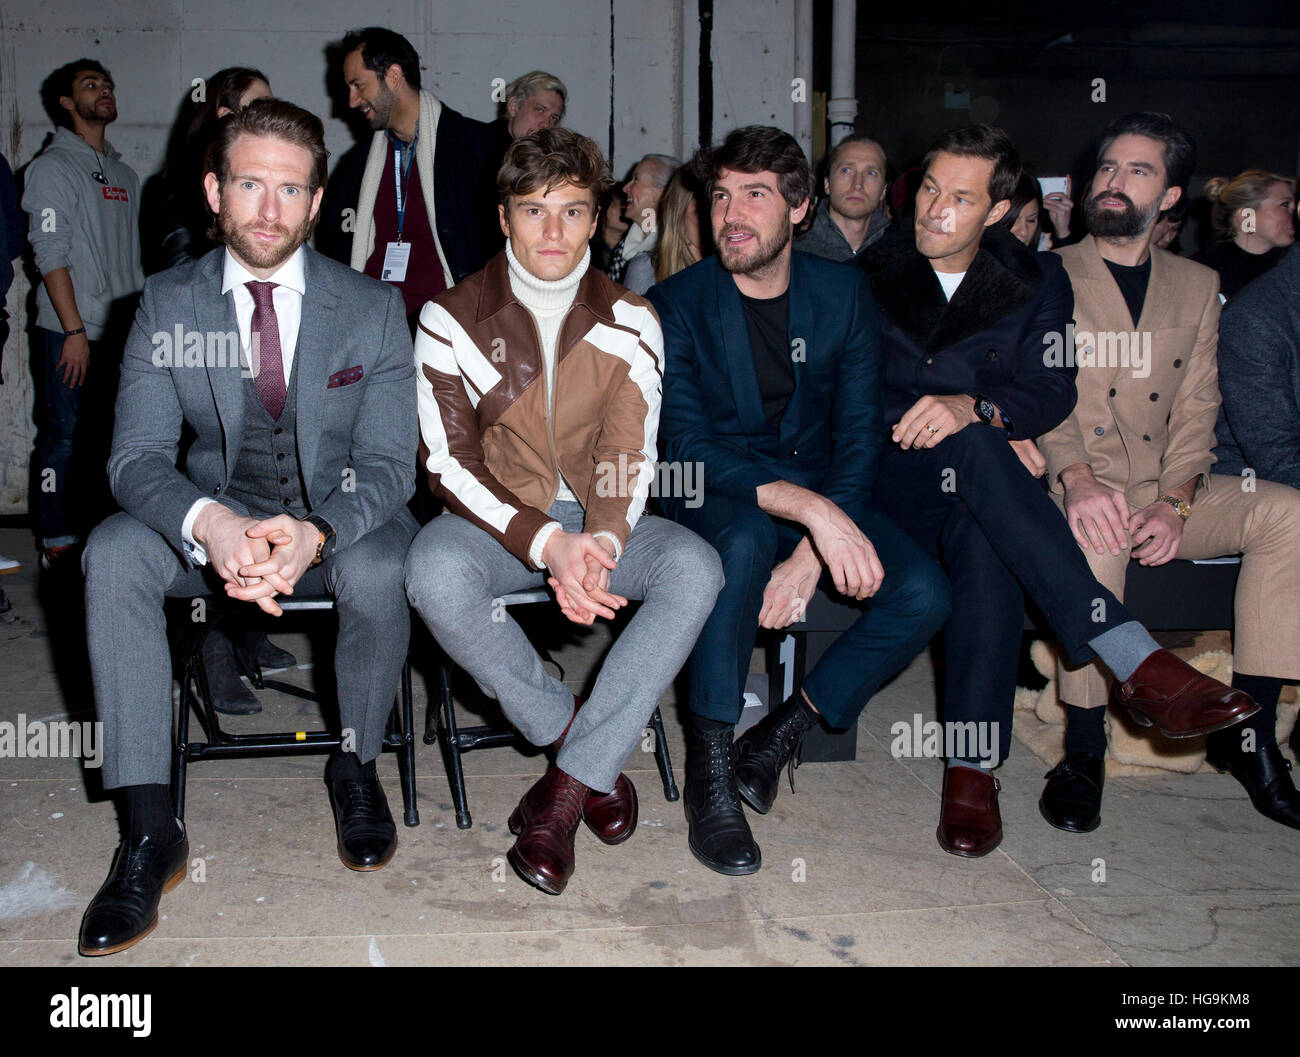 (left to right) Craig McGinlay, Oliver Cheshire, Robert Konjic, Paul Sculfor and Jack Guinnesson the front row during the TOPMAN Design London Fashion Week Men's AW17 show held at Topman Show Space, London. Stock Photo